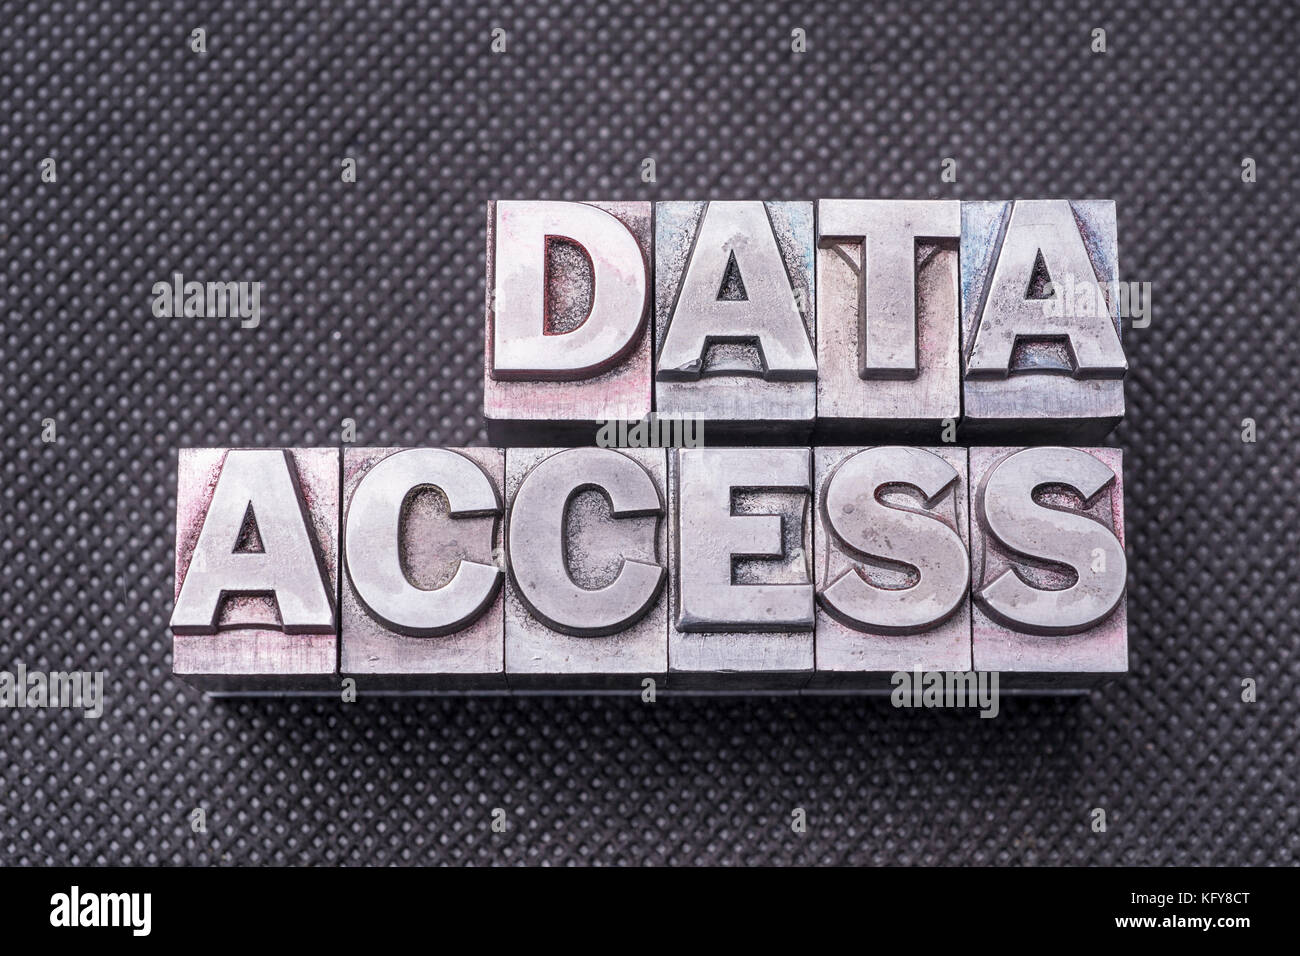 data access phrase made from metallic letterpress blocks on black perforated surface Stock Photo